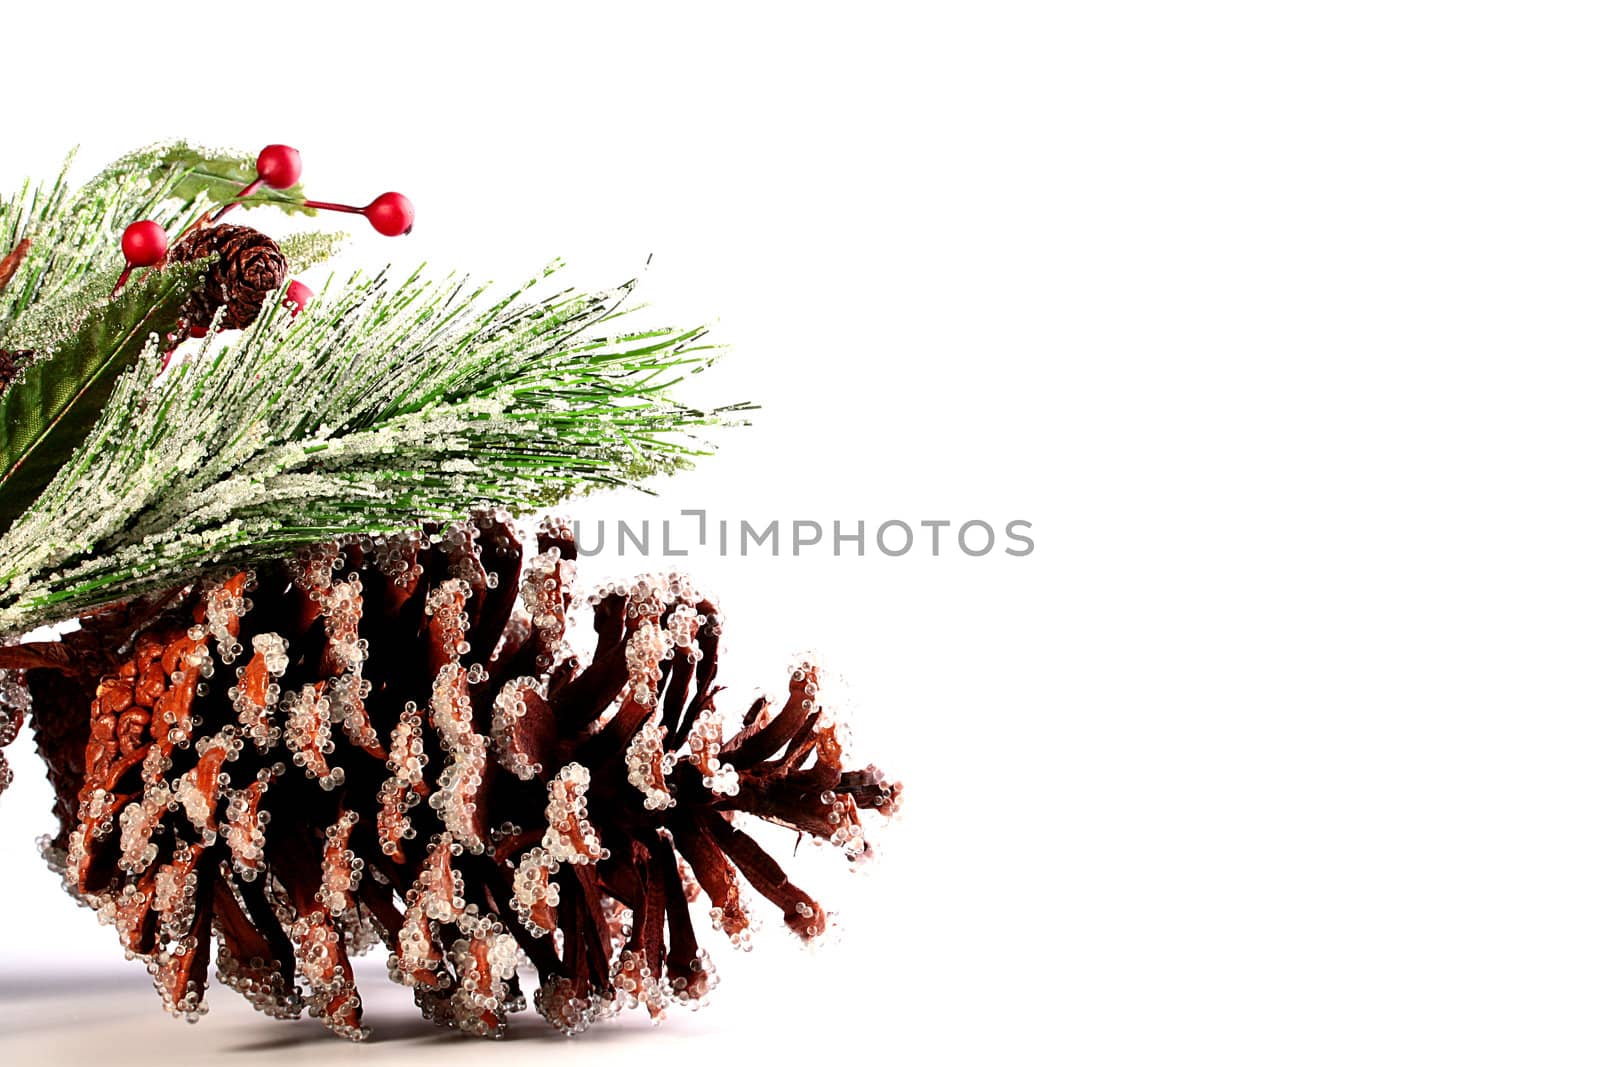 The fur-tree cone, branch and red berries are collected as scenery for celebrating of new year.